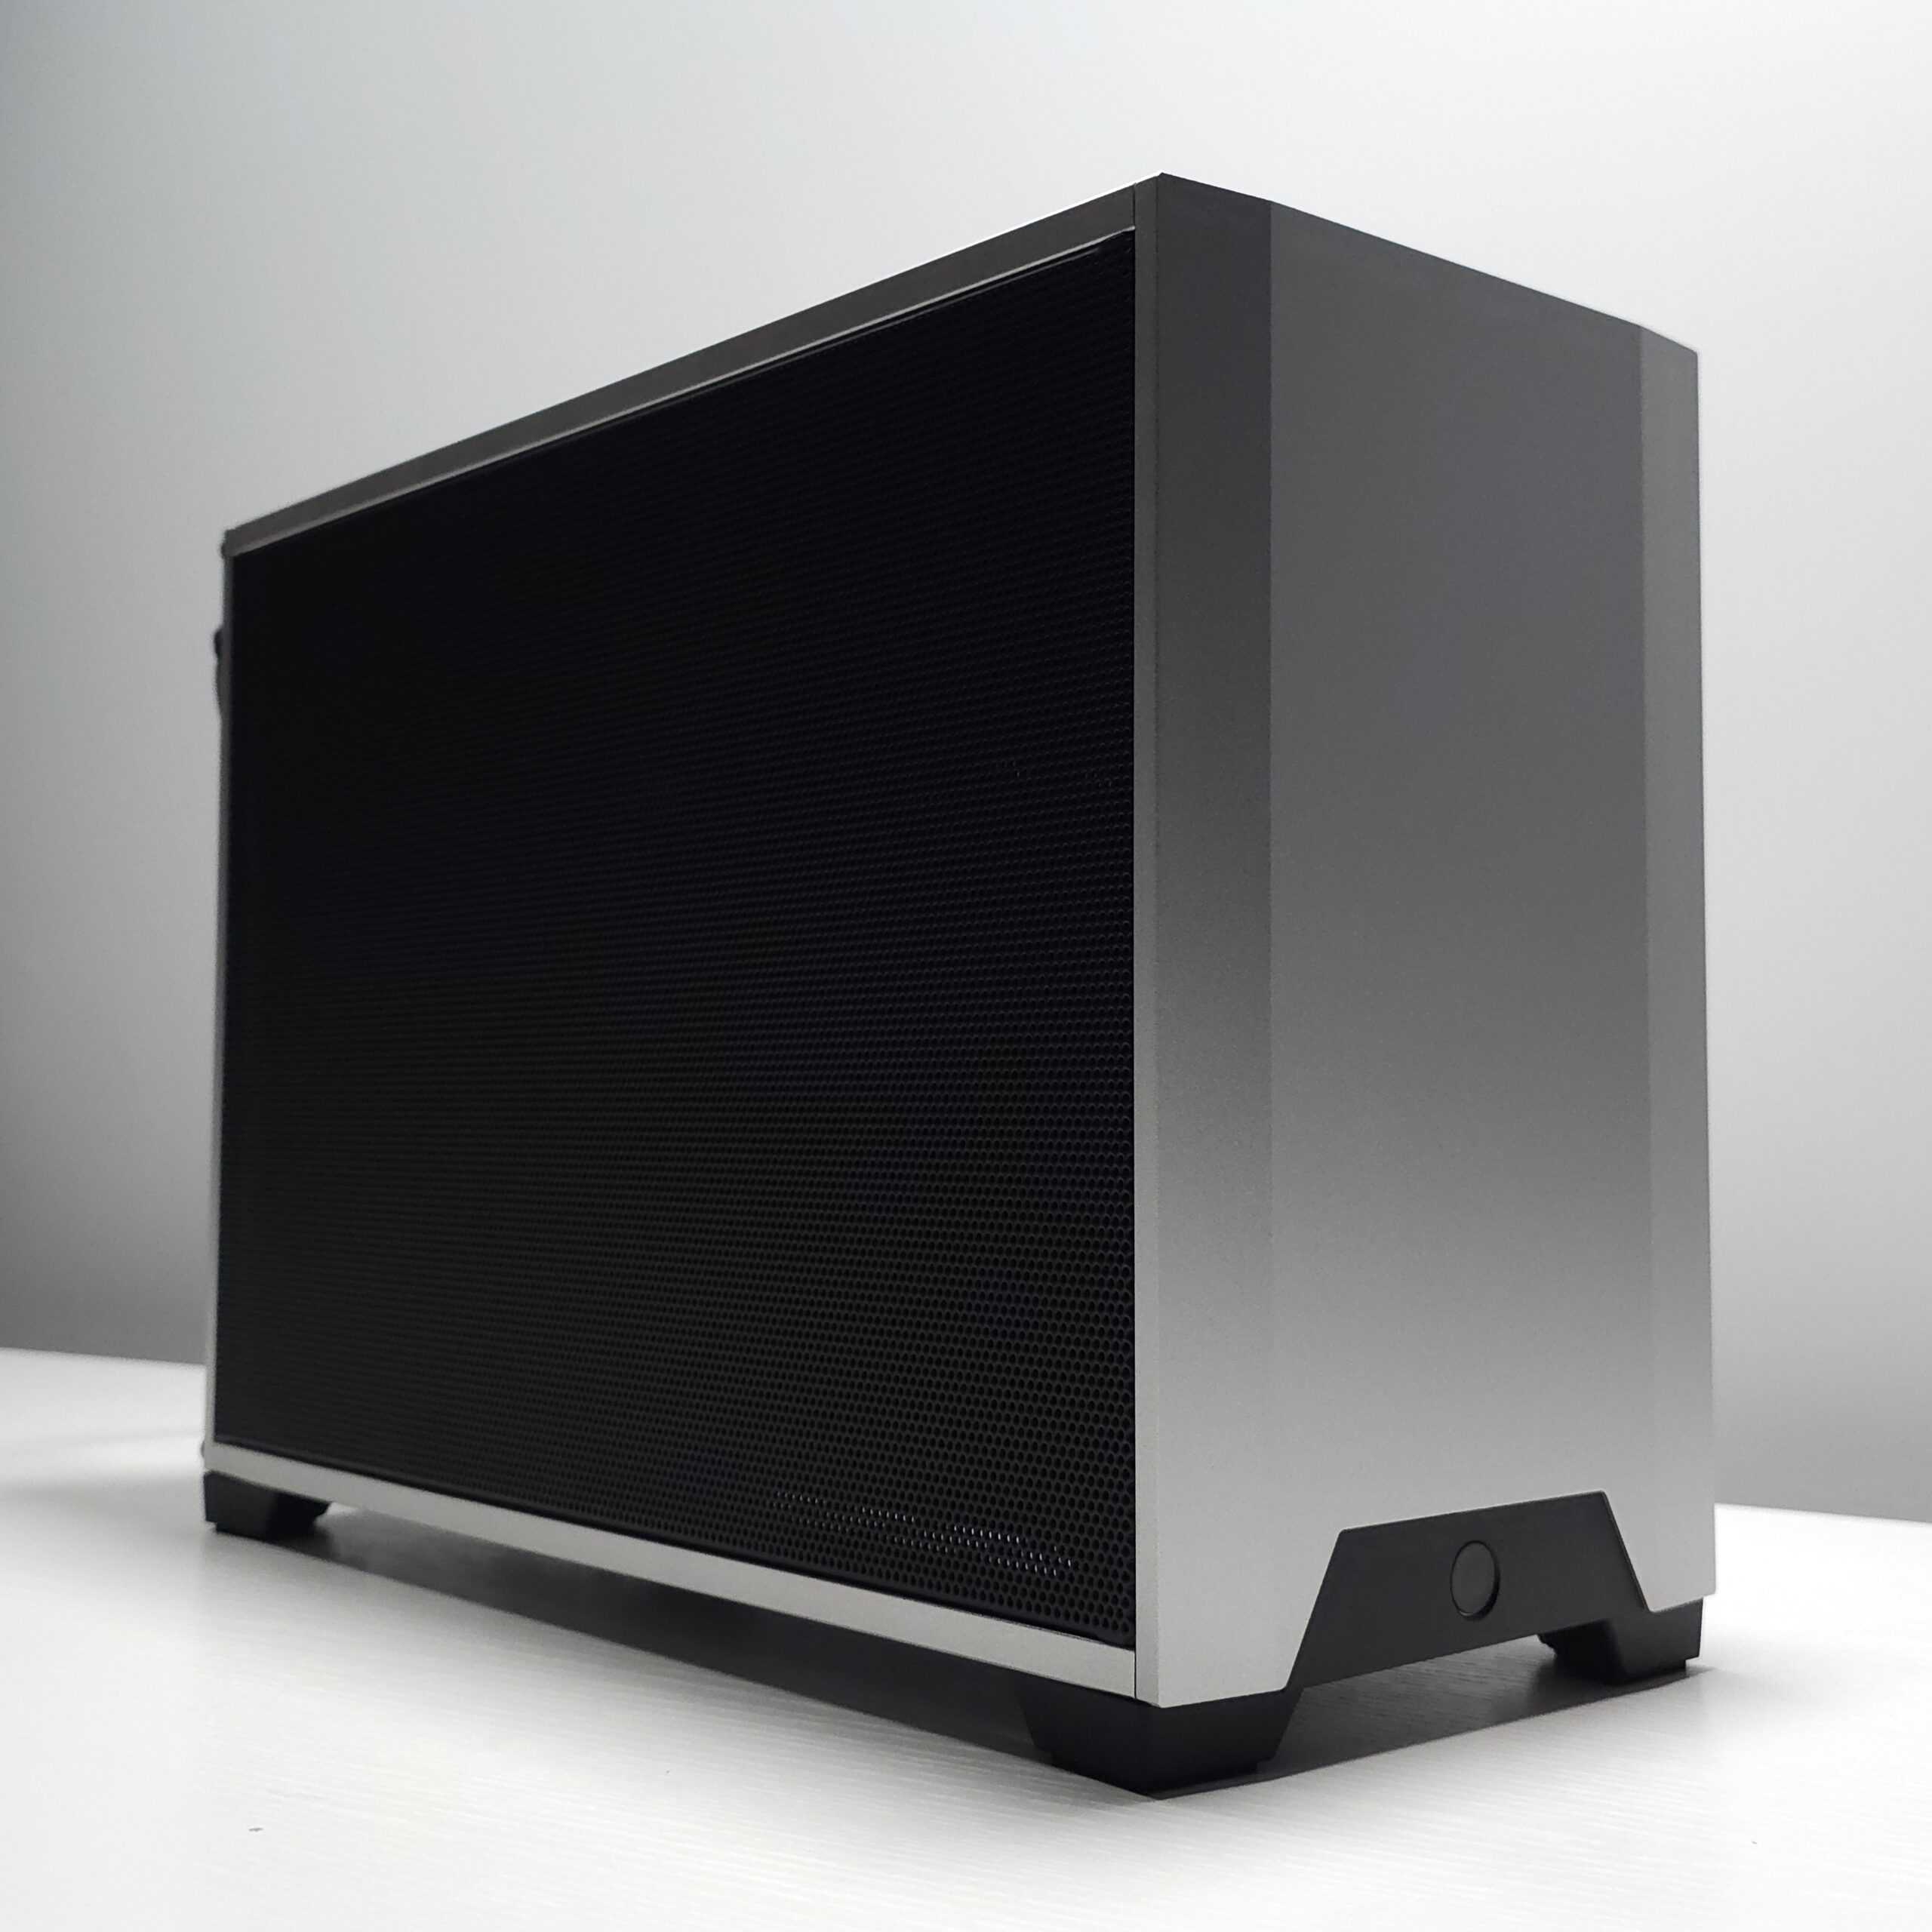 Featured image for “NCASE EVO”